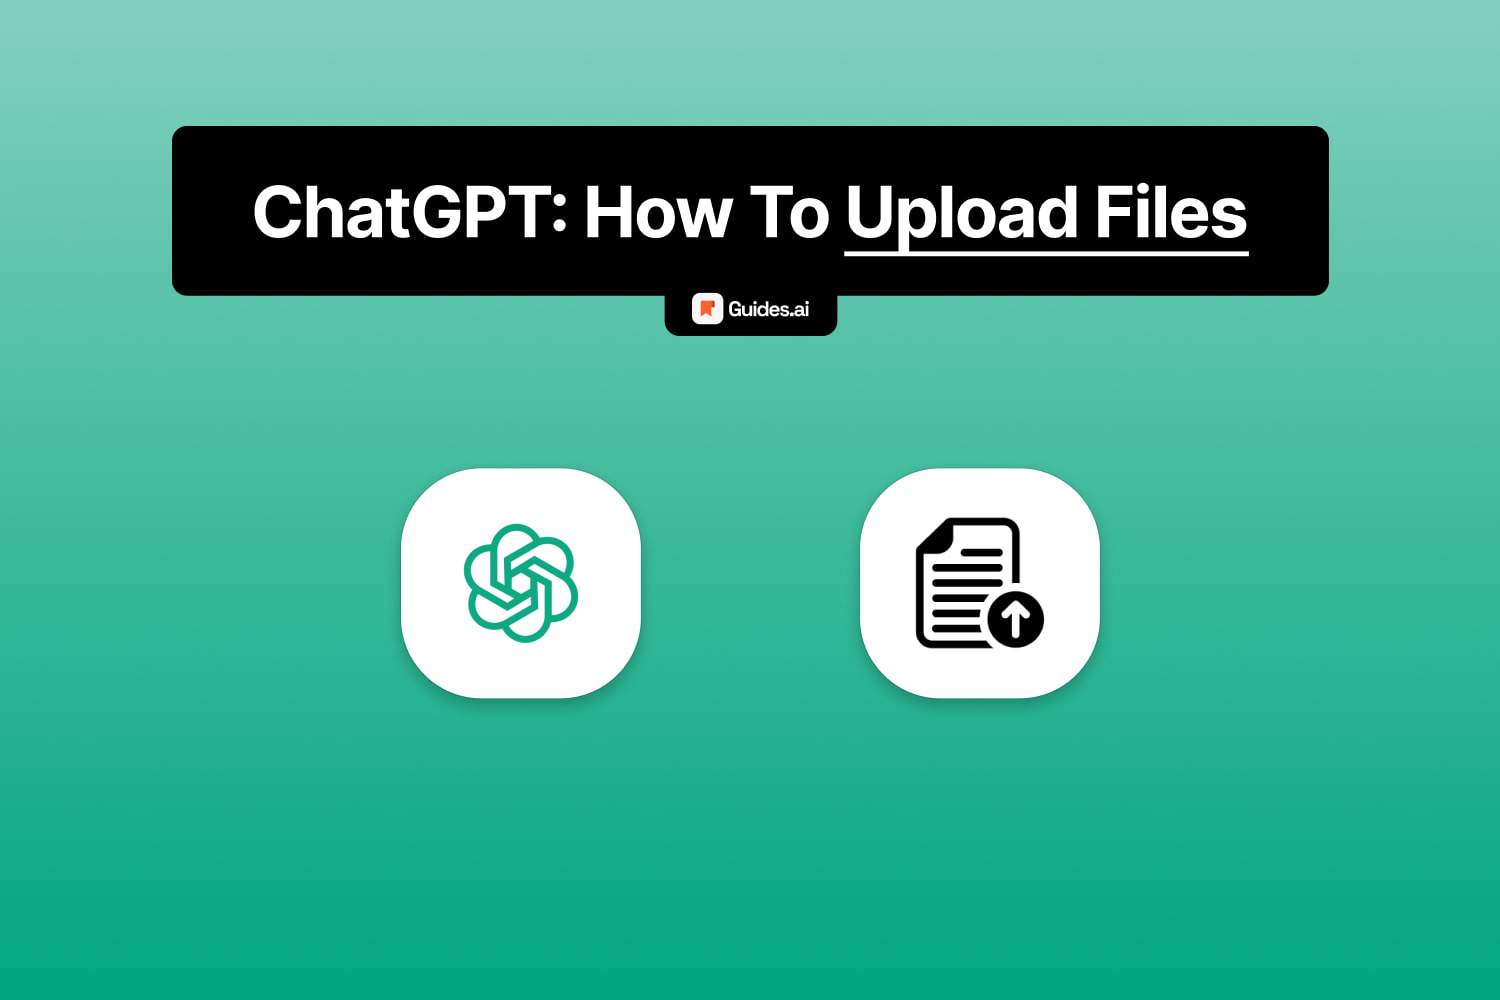 How to upload a file in ChatGPT